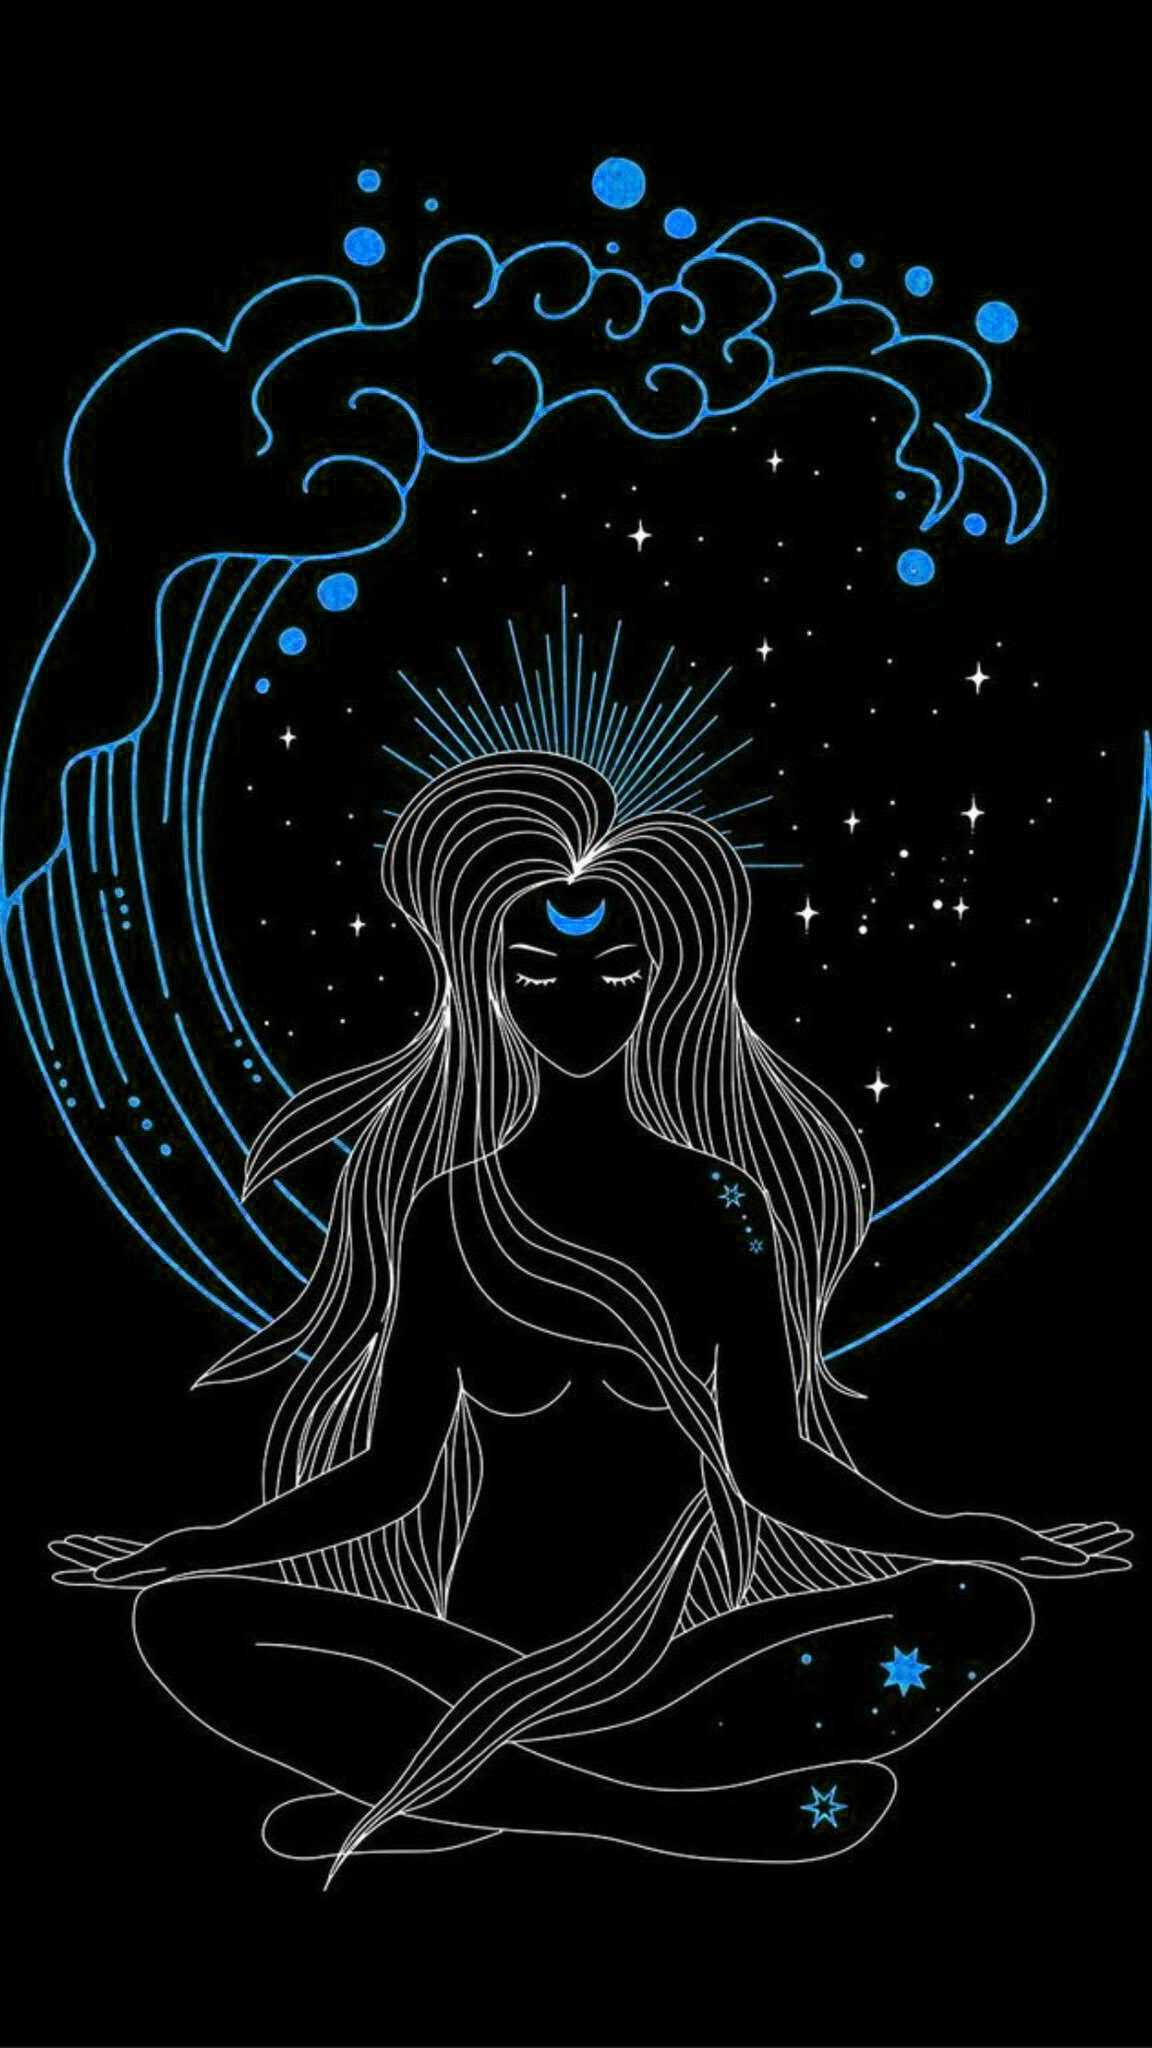 A woman in the lotus position with stars and waves - Spiritual